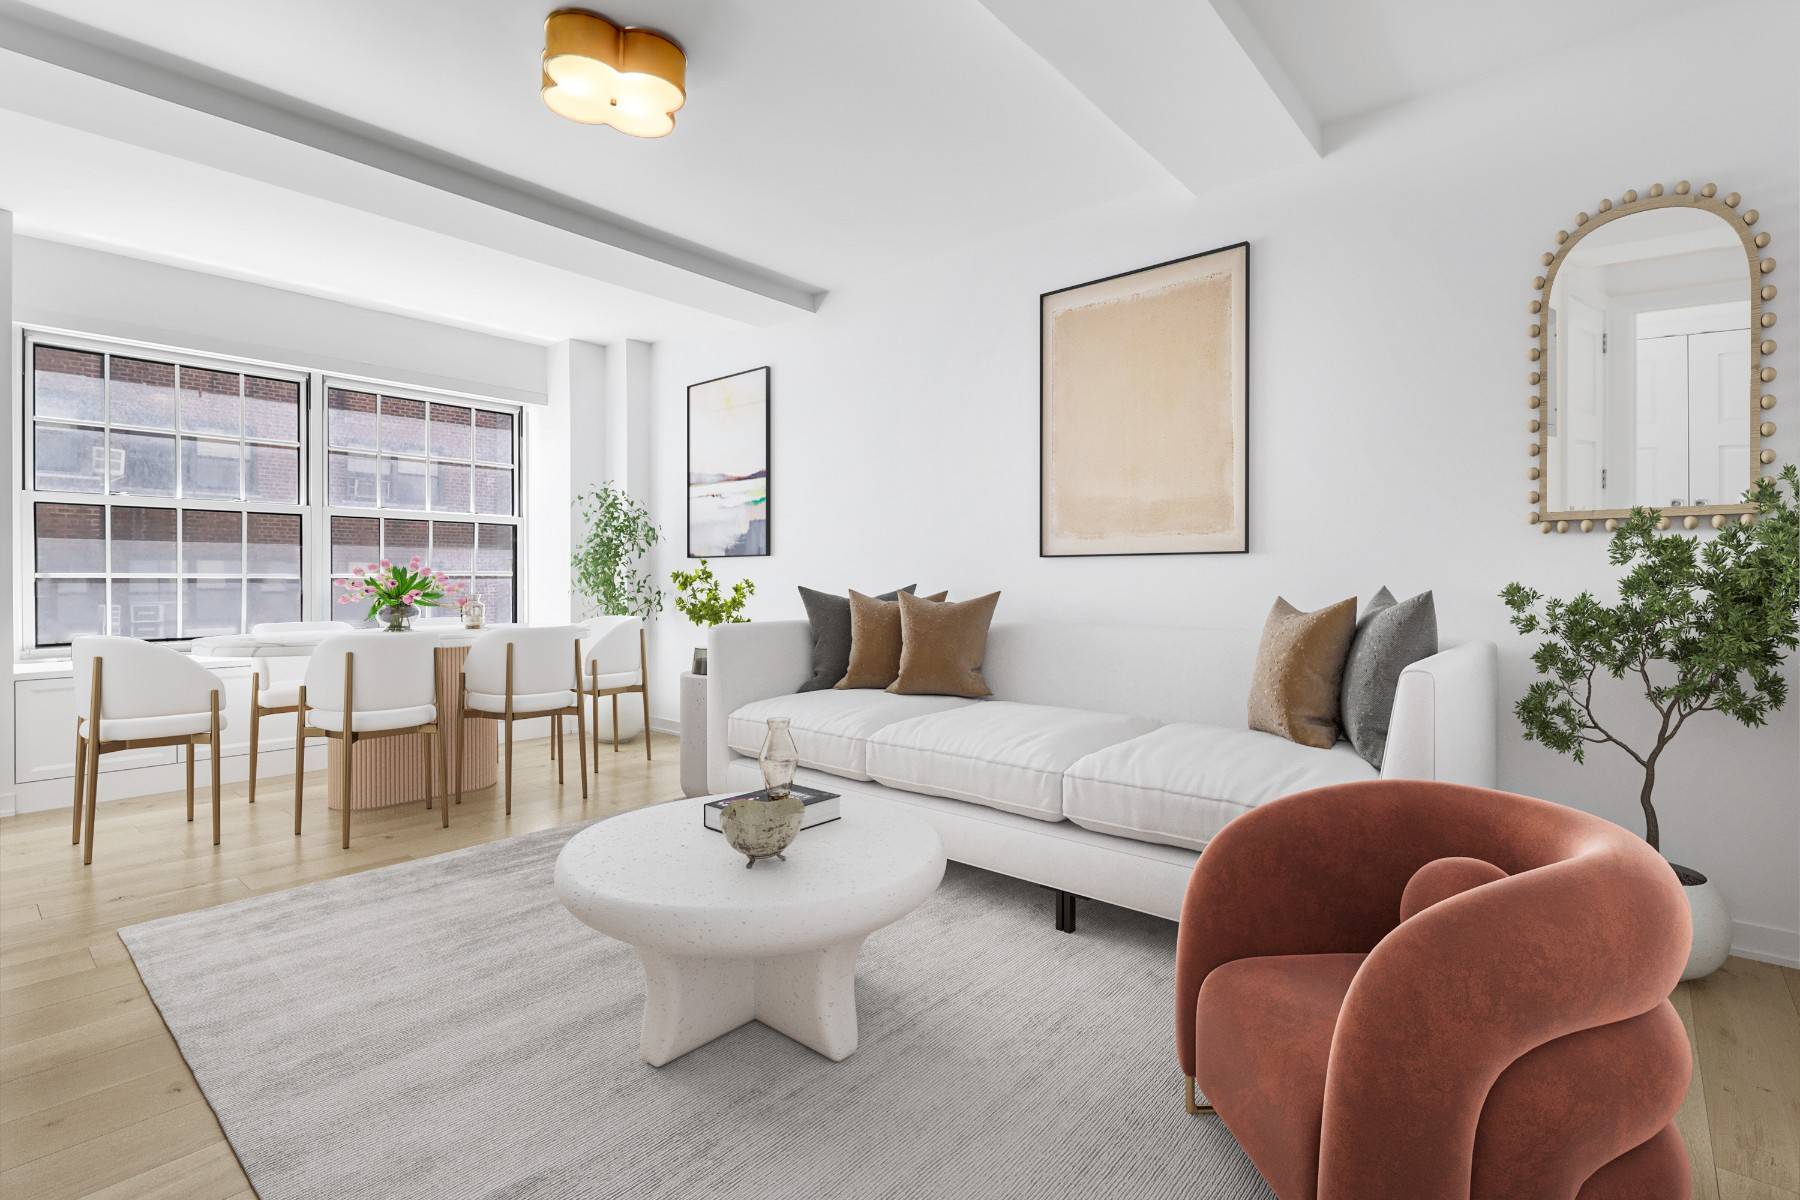 Exquisitely crafted by renowned design firm Champalimaud, this prewar gem by Rosario Candela presents a luxurious one bedroom, one bathroom haven at 12 East 88th Street.